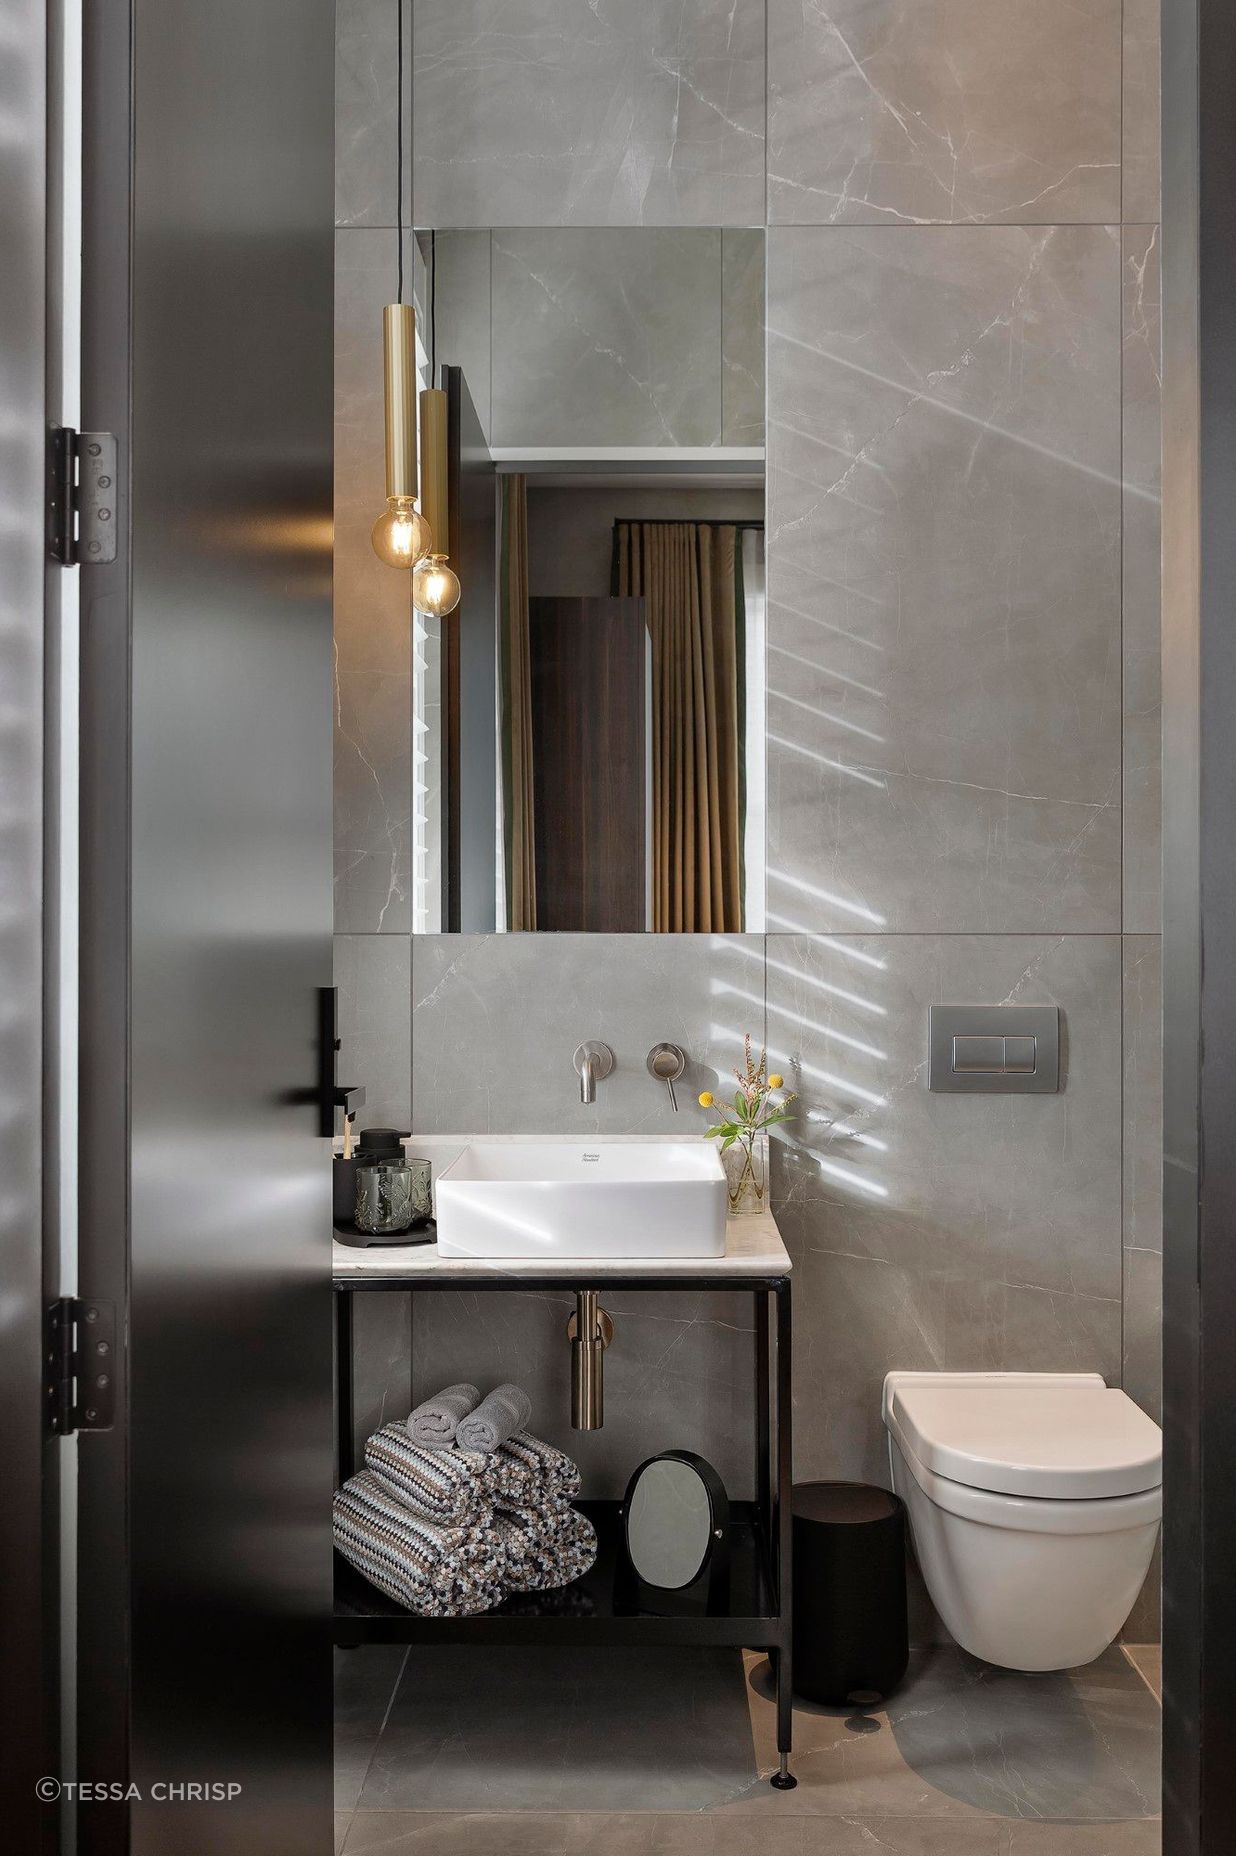 Because of the very limited timeframe quick solutions were key; the existing free floating large basins were replaced with a new vanity unit and smaller basins, using the same plumbing outlets for toiletries.